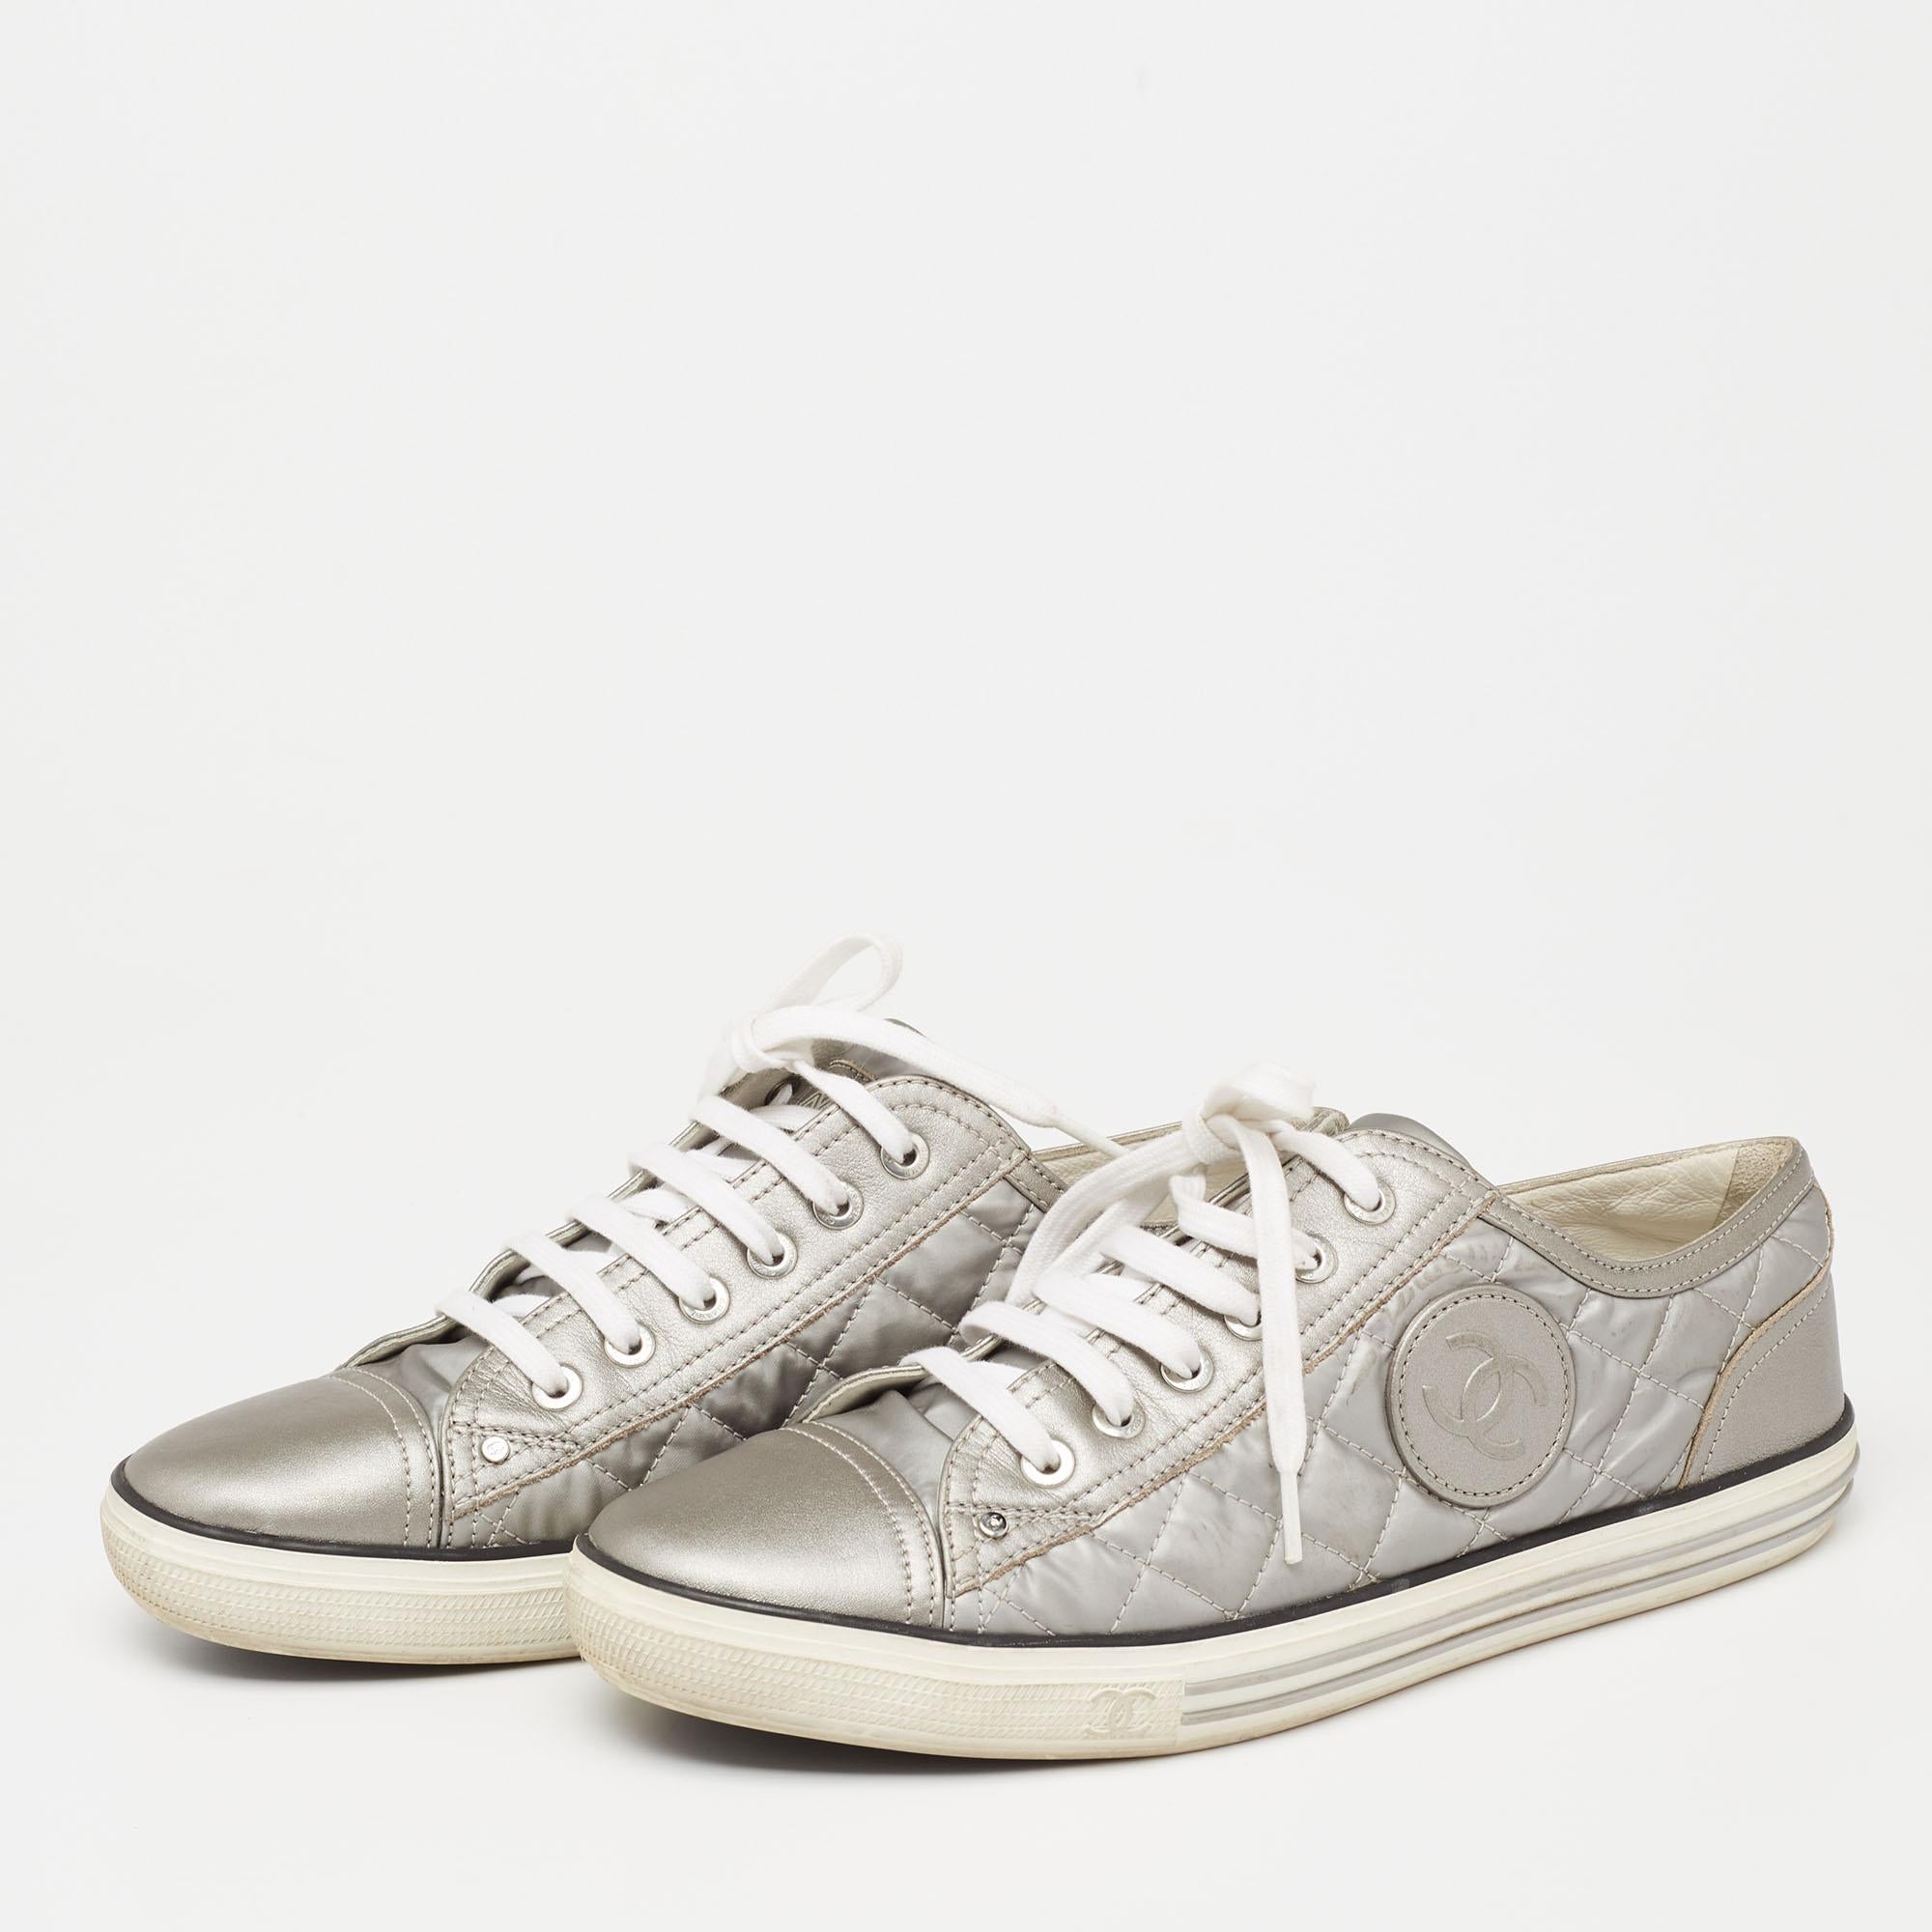 Look your stylish best every time you step out wearing these sneakers from the House of Chanel. They are made from quilted leather into a low-top silhouette. They have lace-ups on the vamps. These Chanel sneakers are definitely worth the investment.